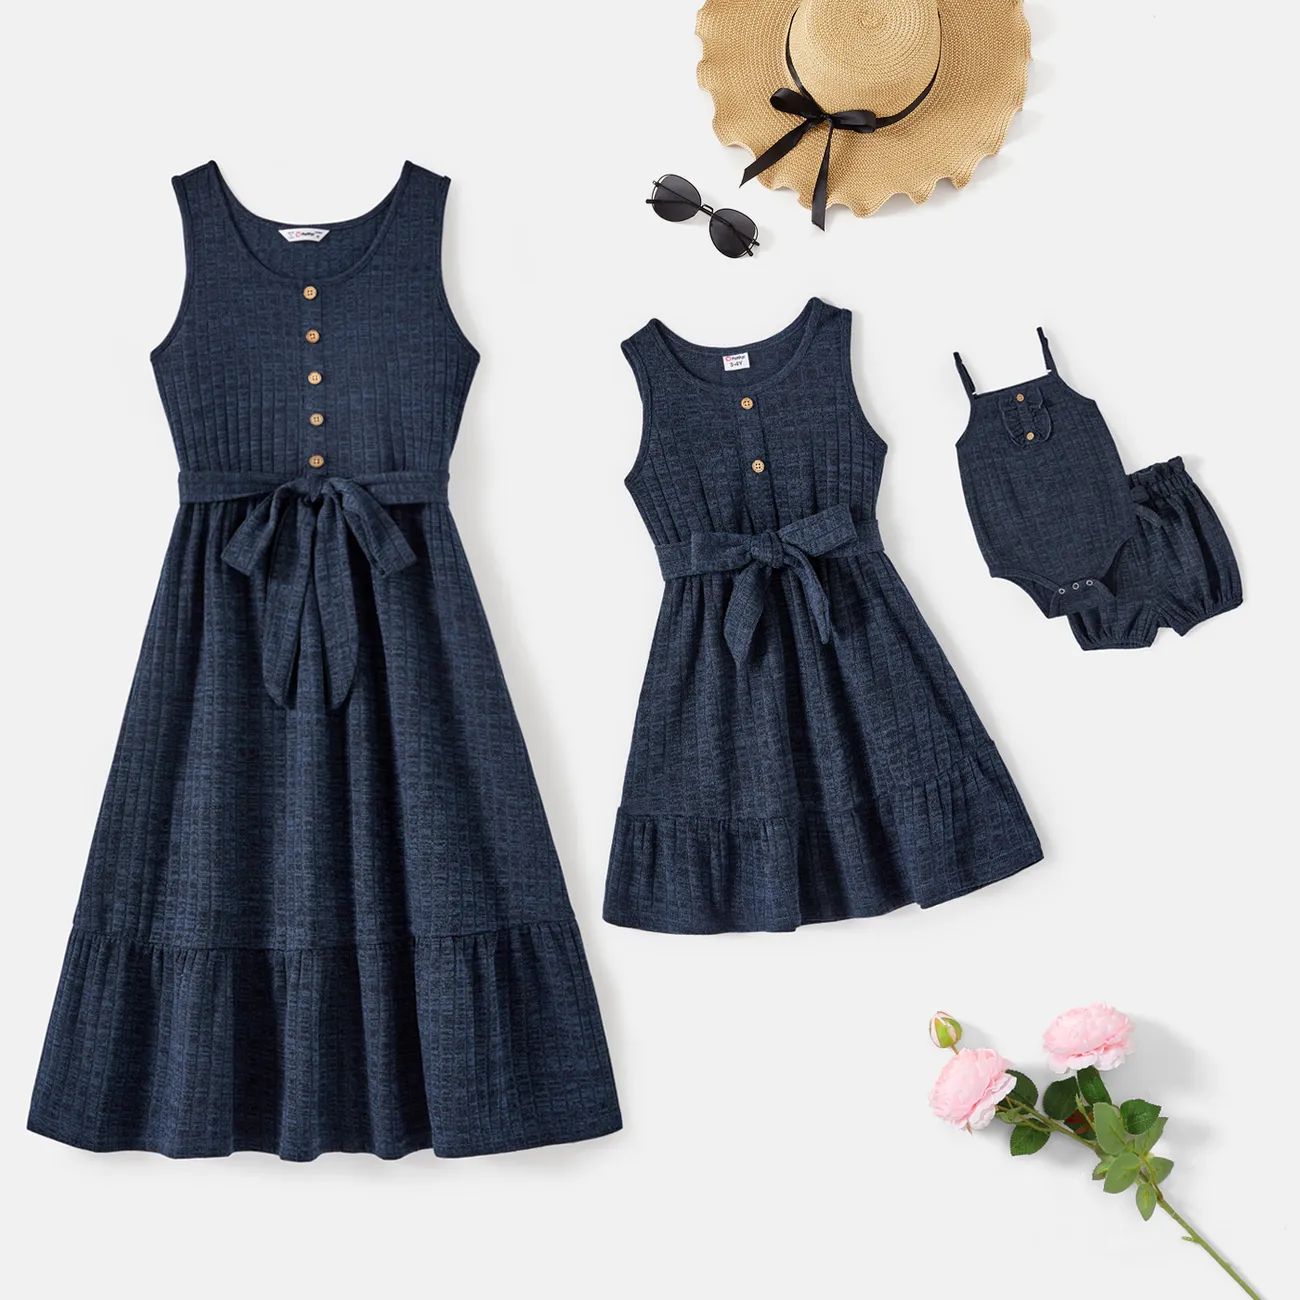 Mommy and Me dresses, tops, and sets | PatPat | PatPat